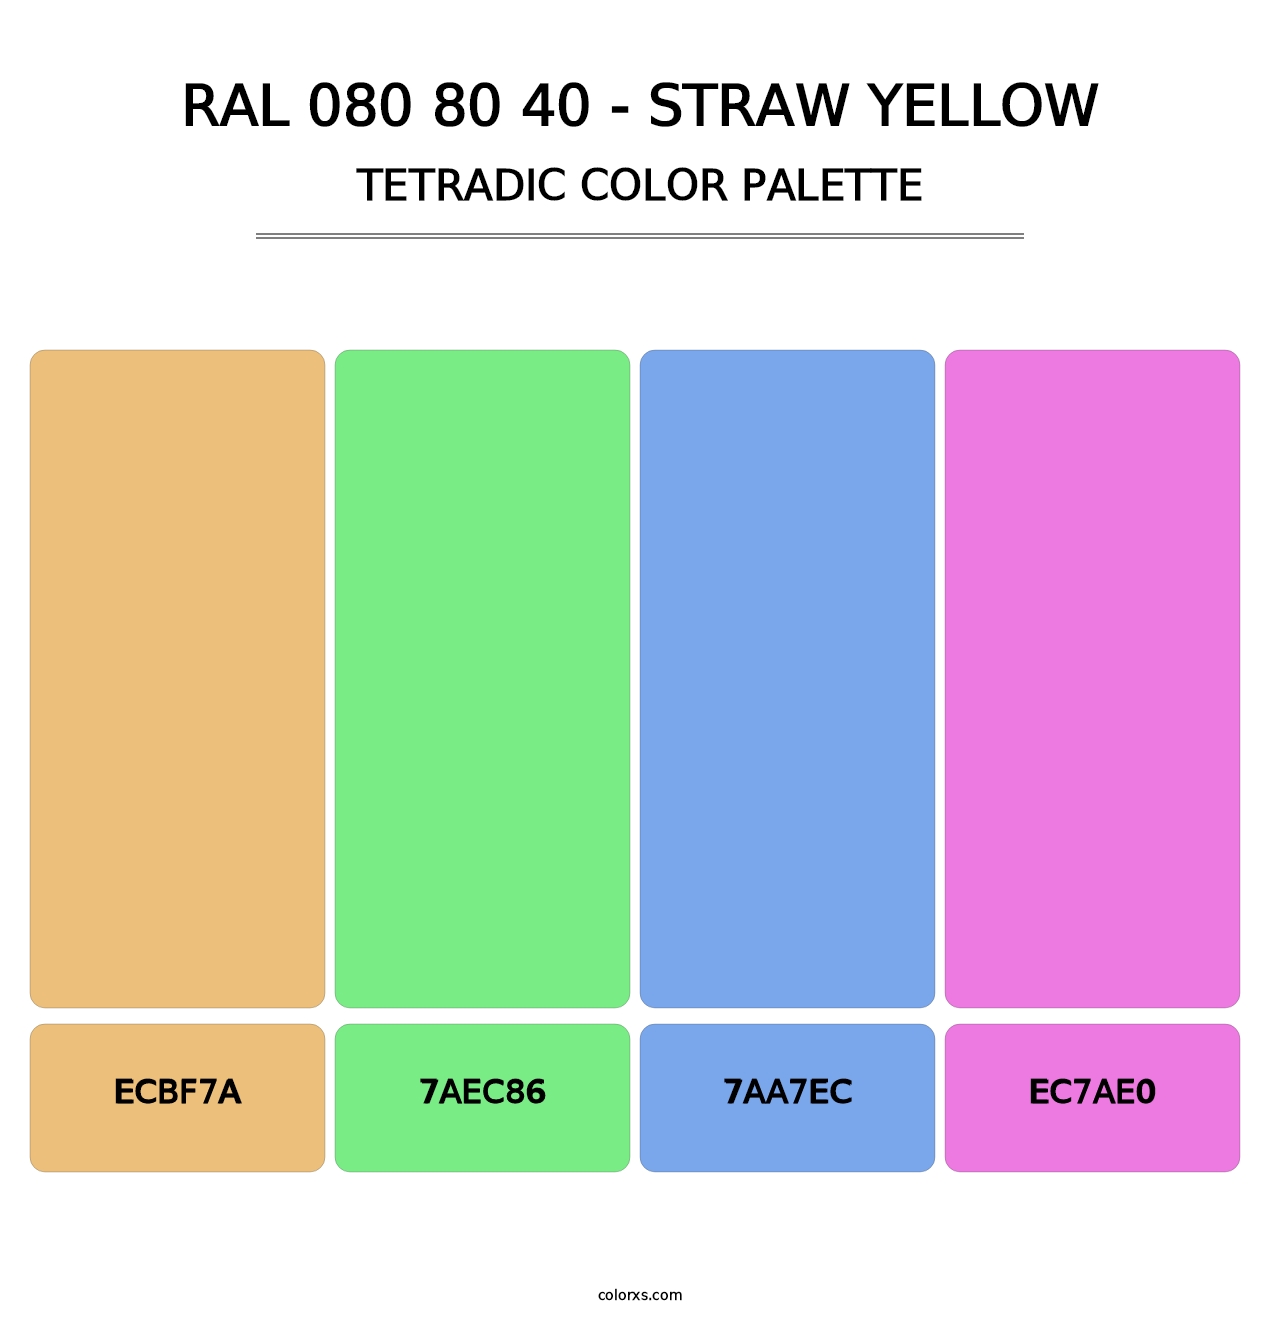 RAL 080 80 40 - Straw Yellow - Tetradic Color Palette